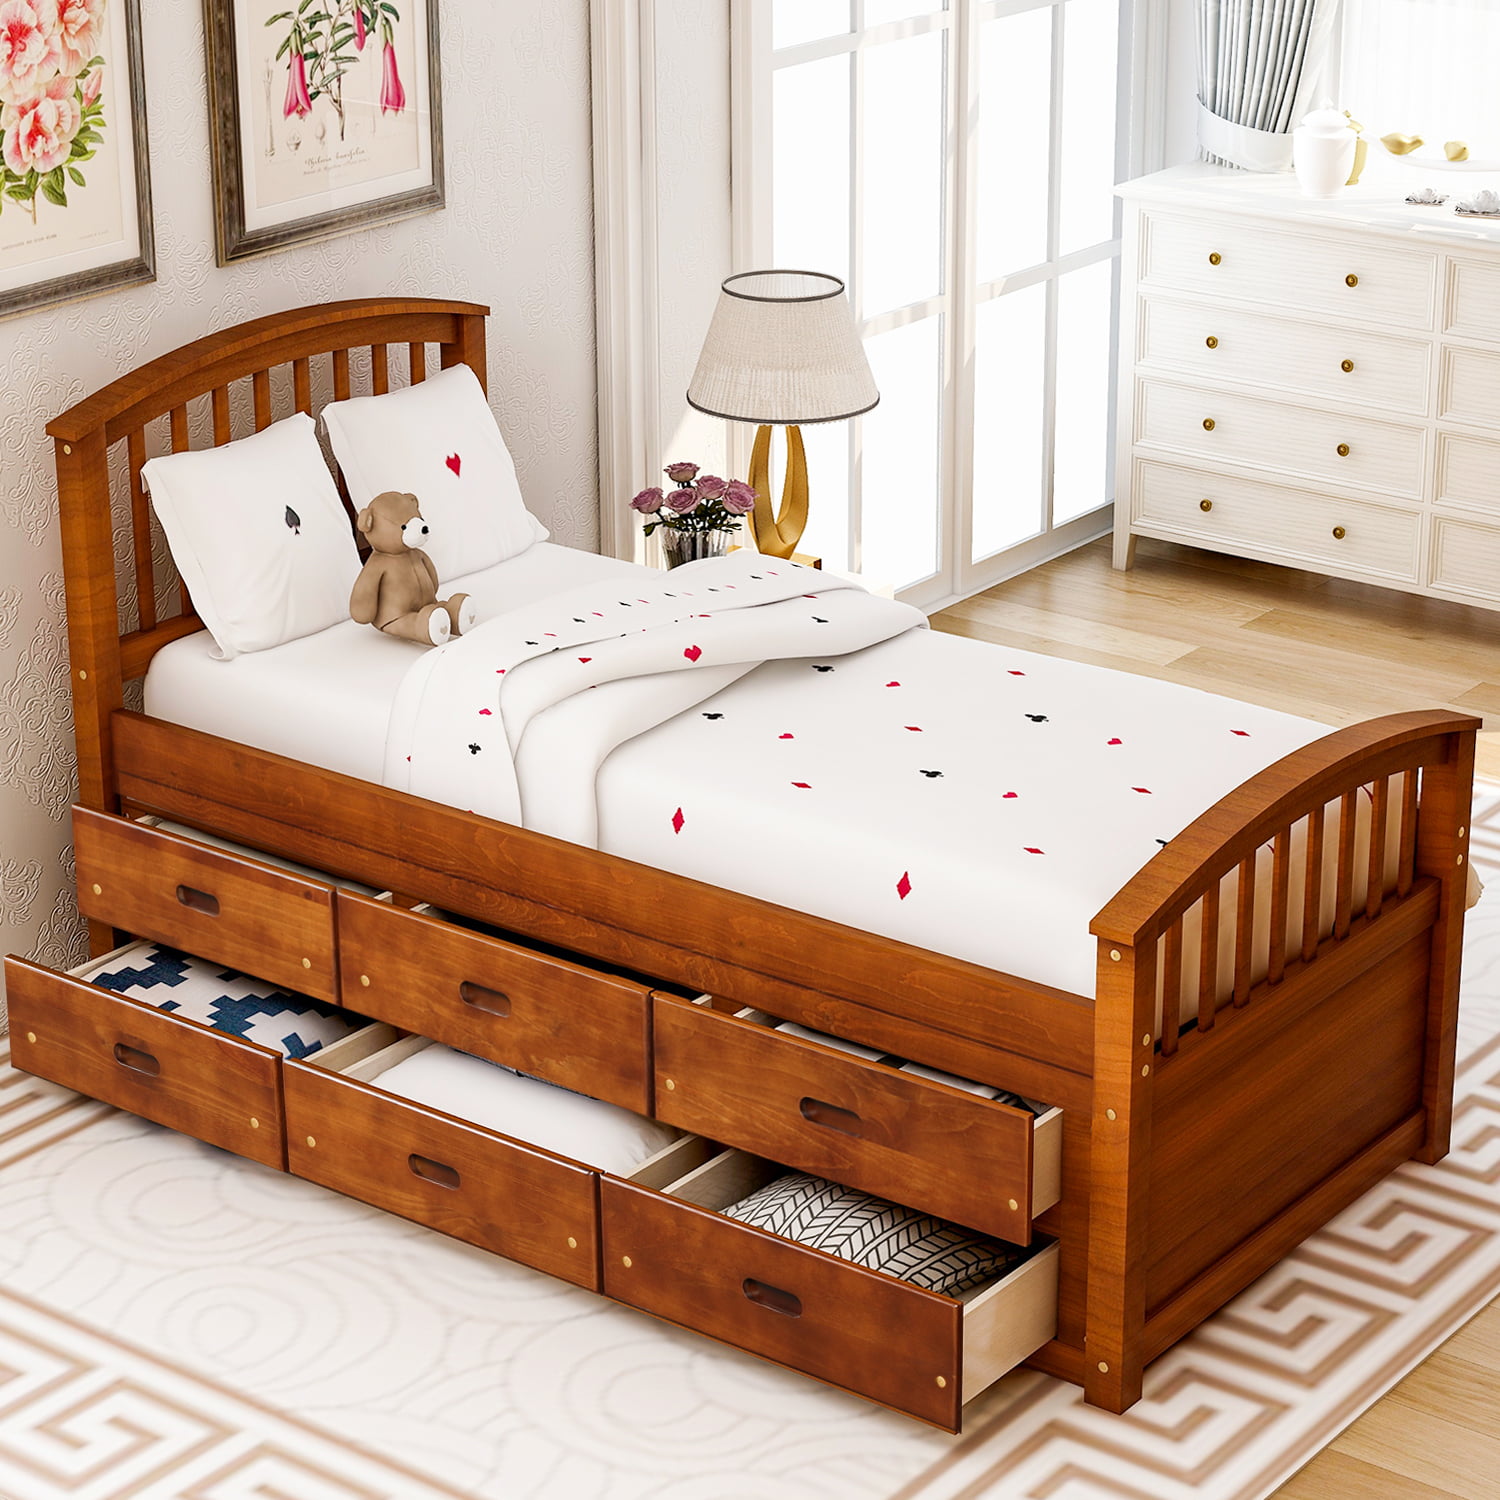 Details about   Wood Full Queen Headboard With Bookshelf Classic Gray Oak Bedroom Furniture